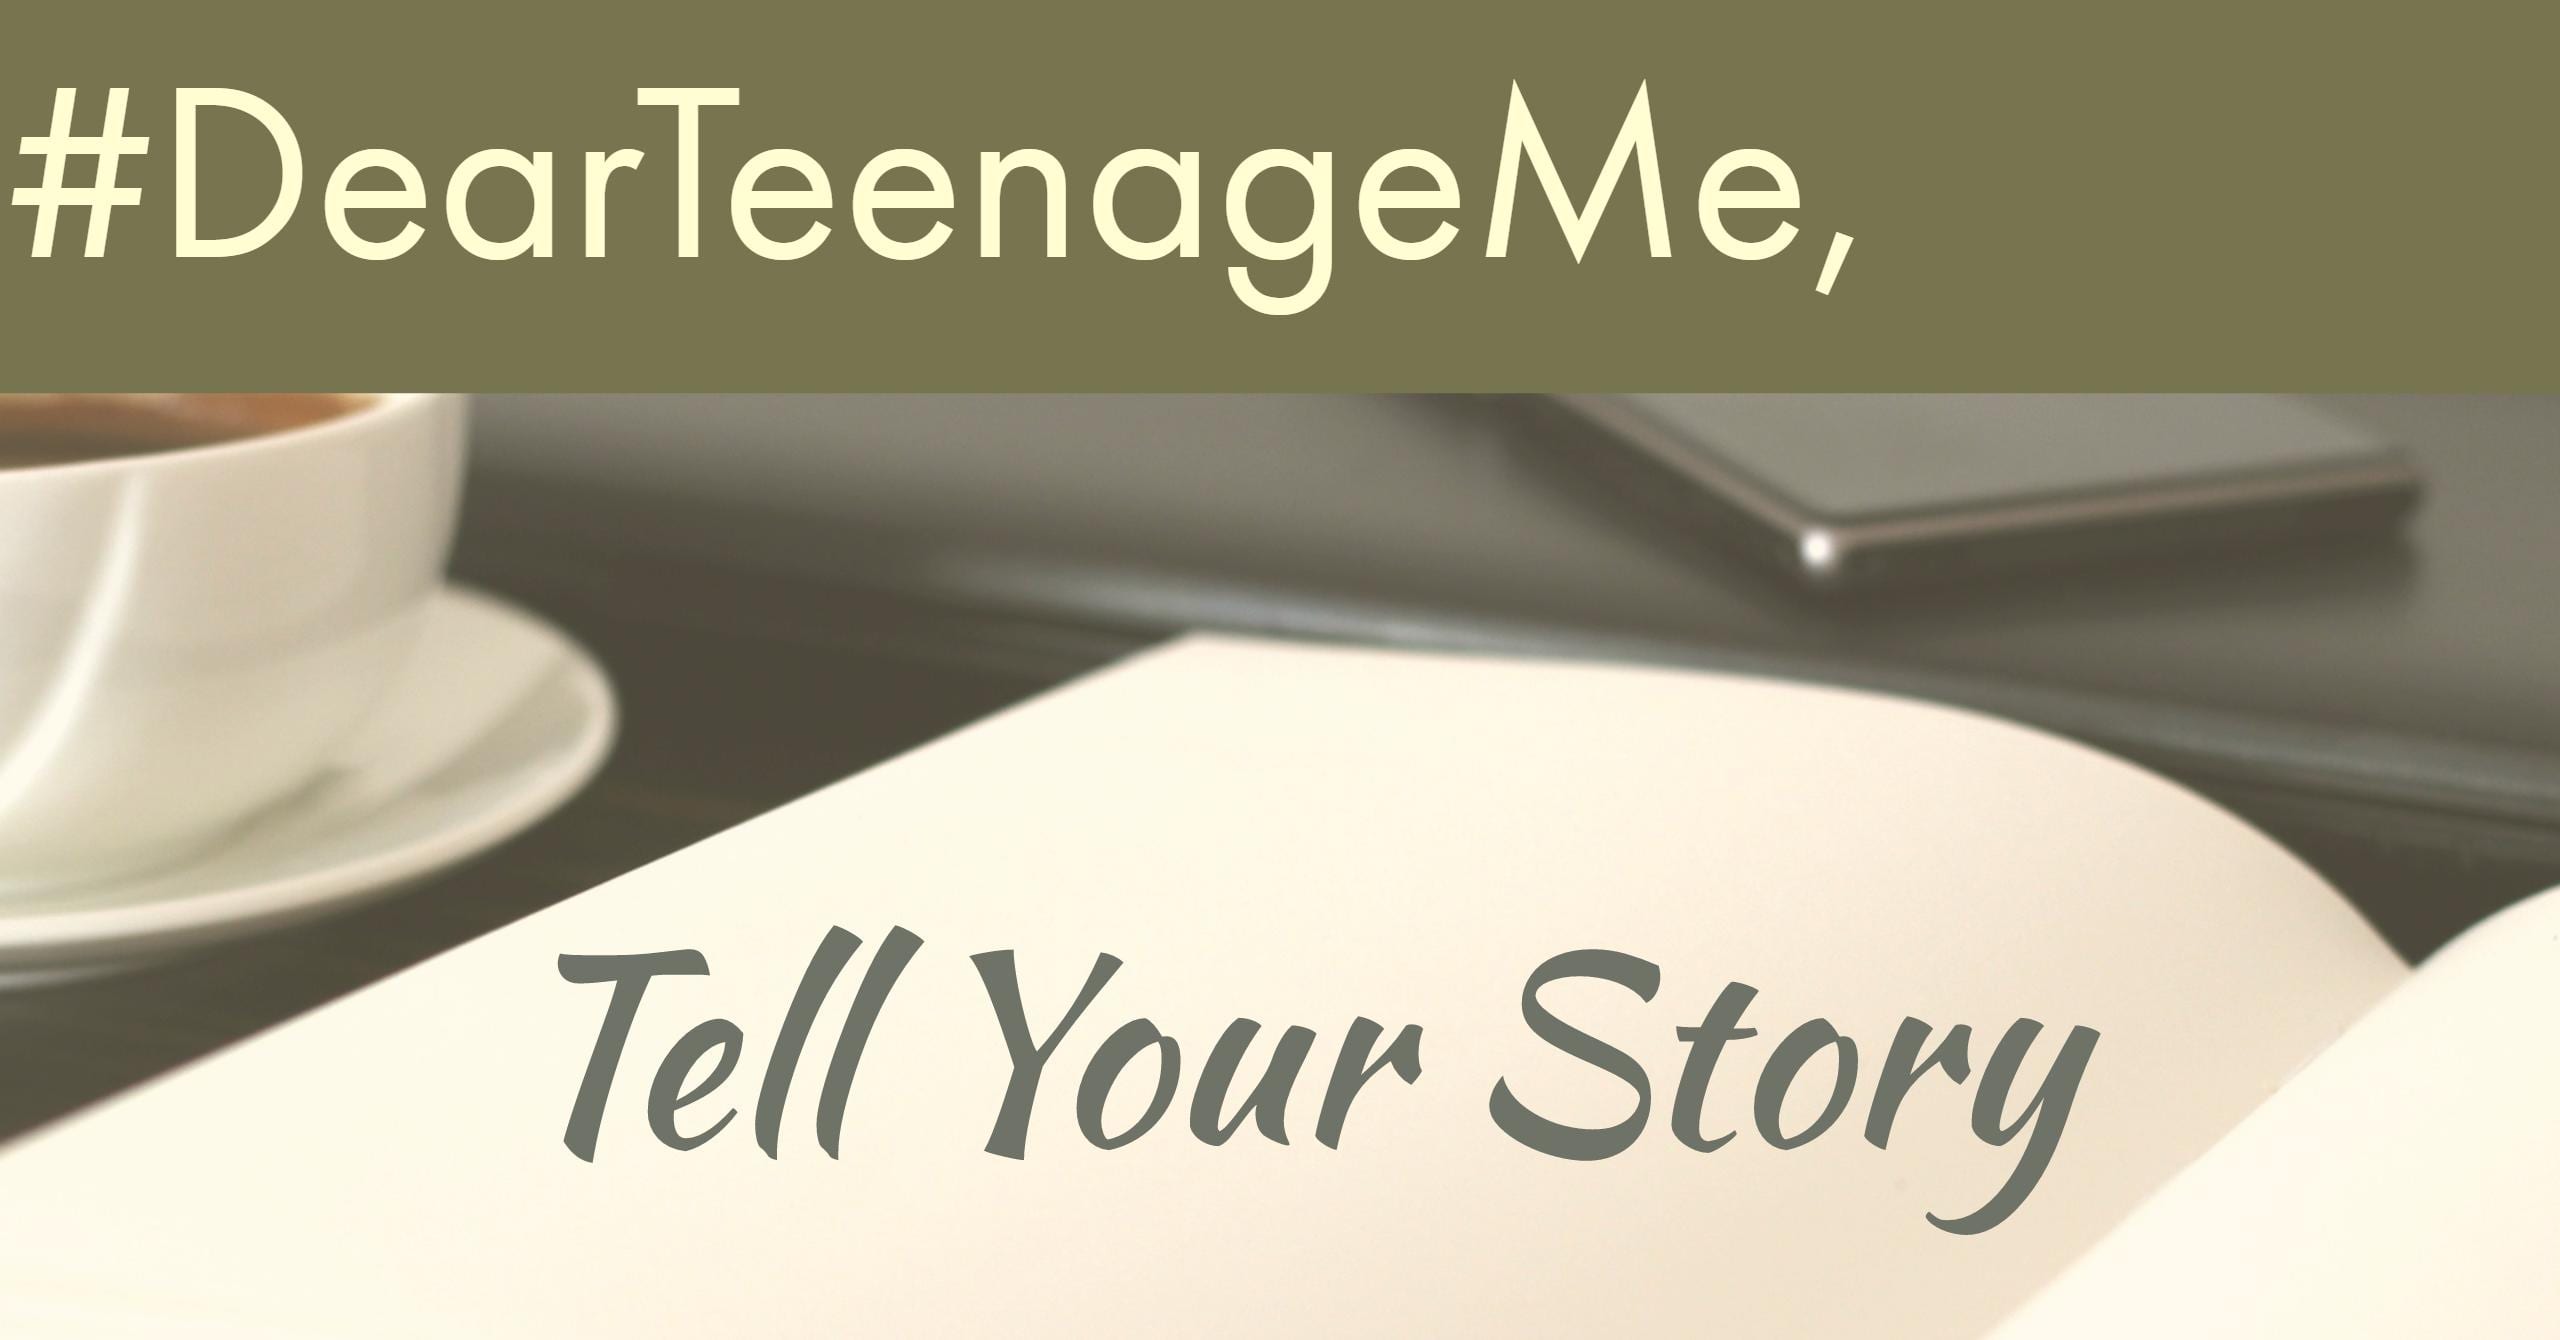 #DearTeenageMe, Tell Your Story